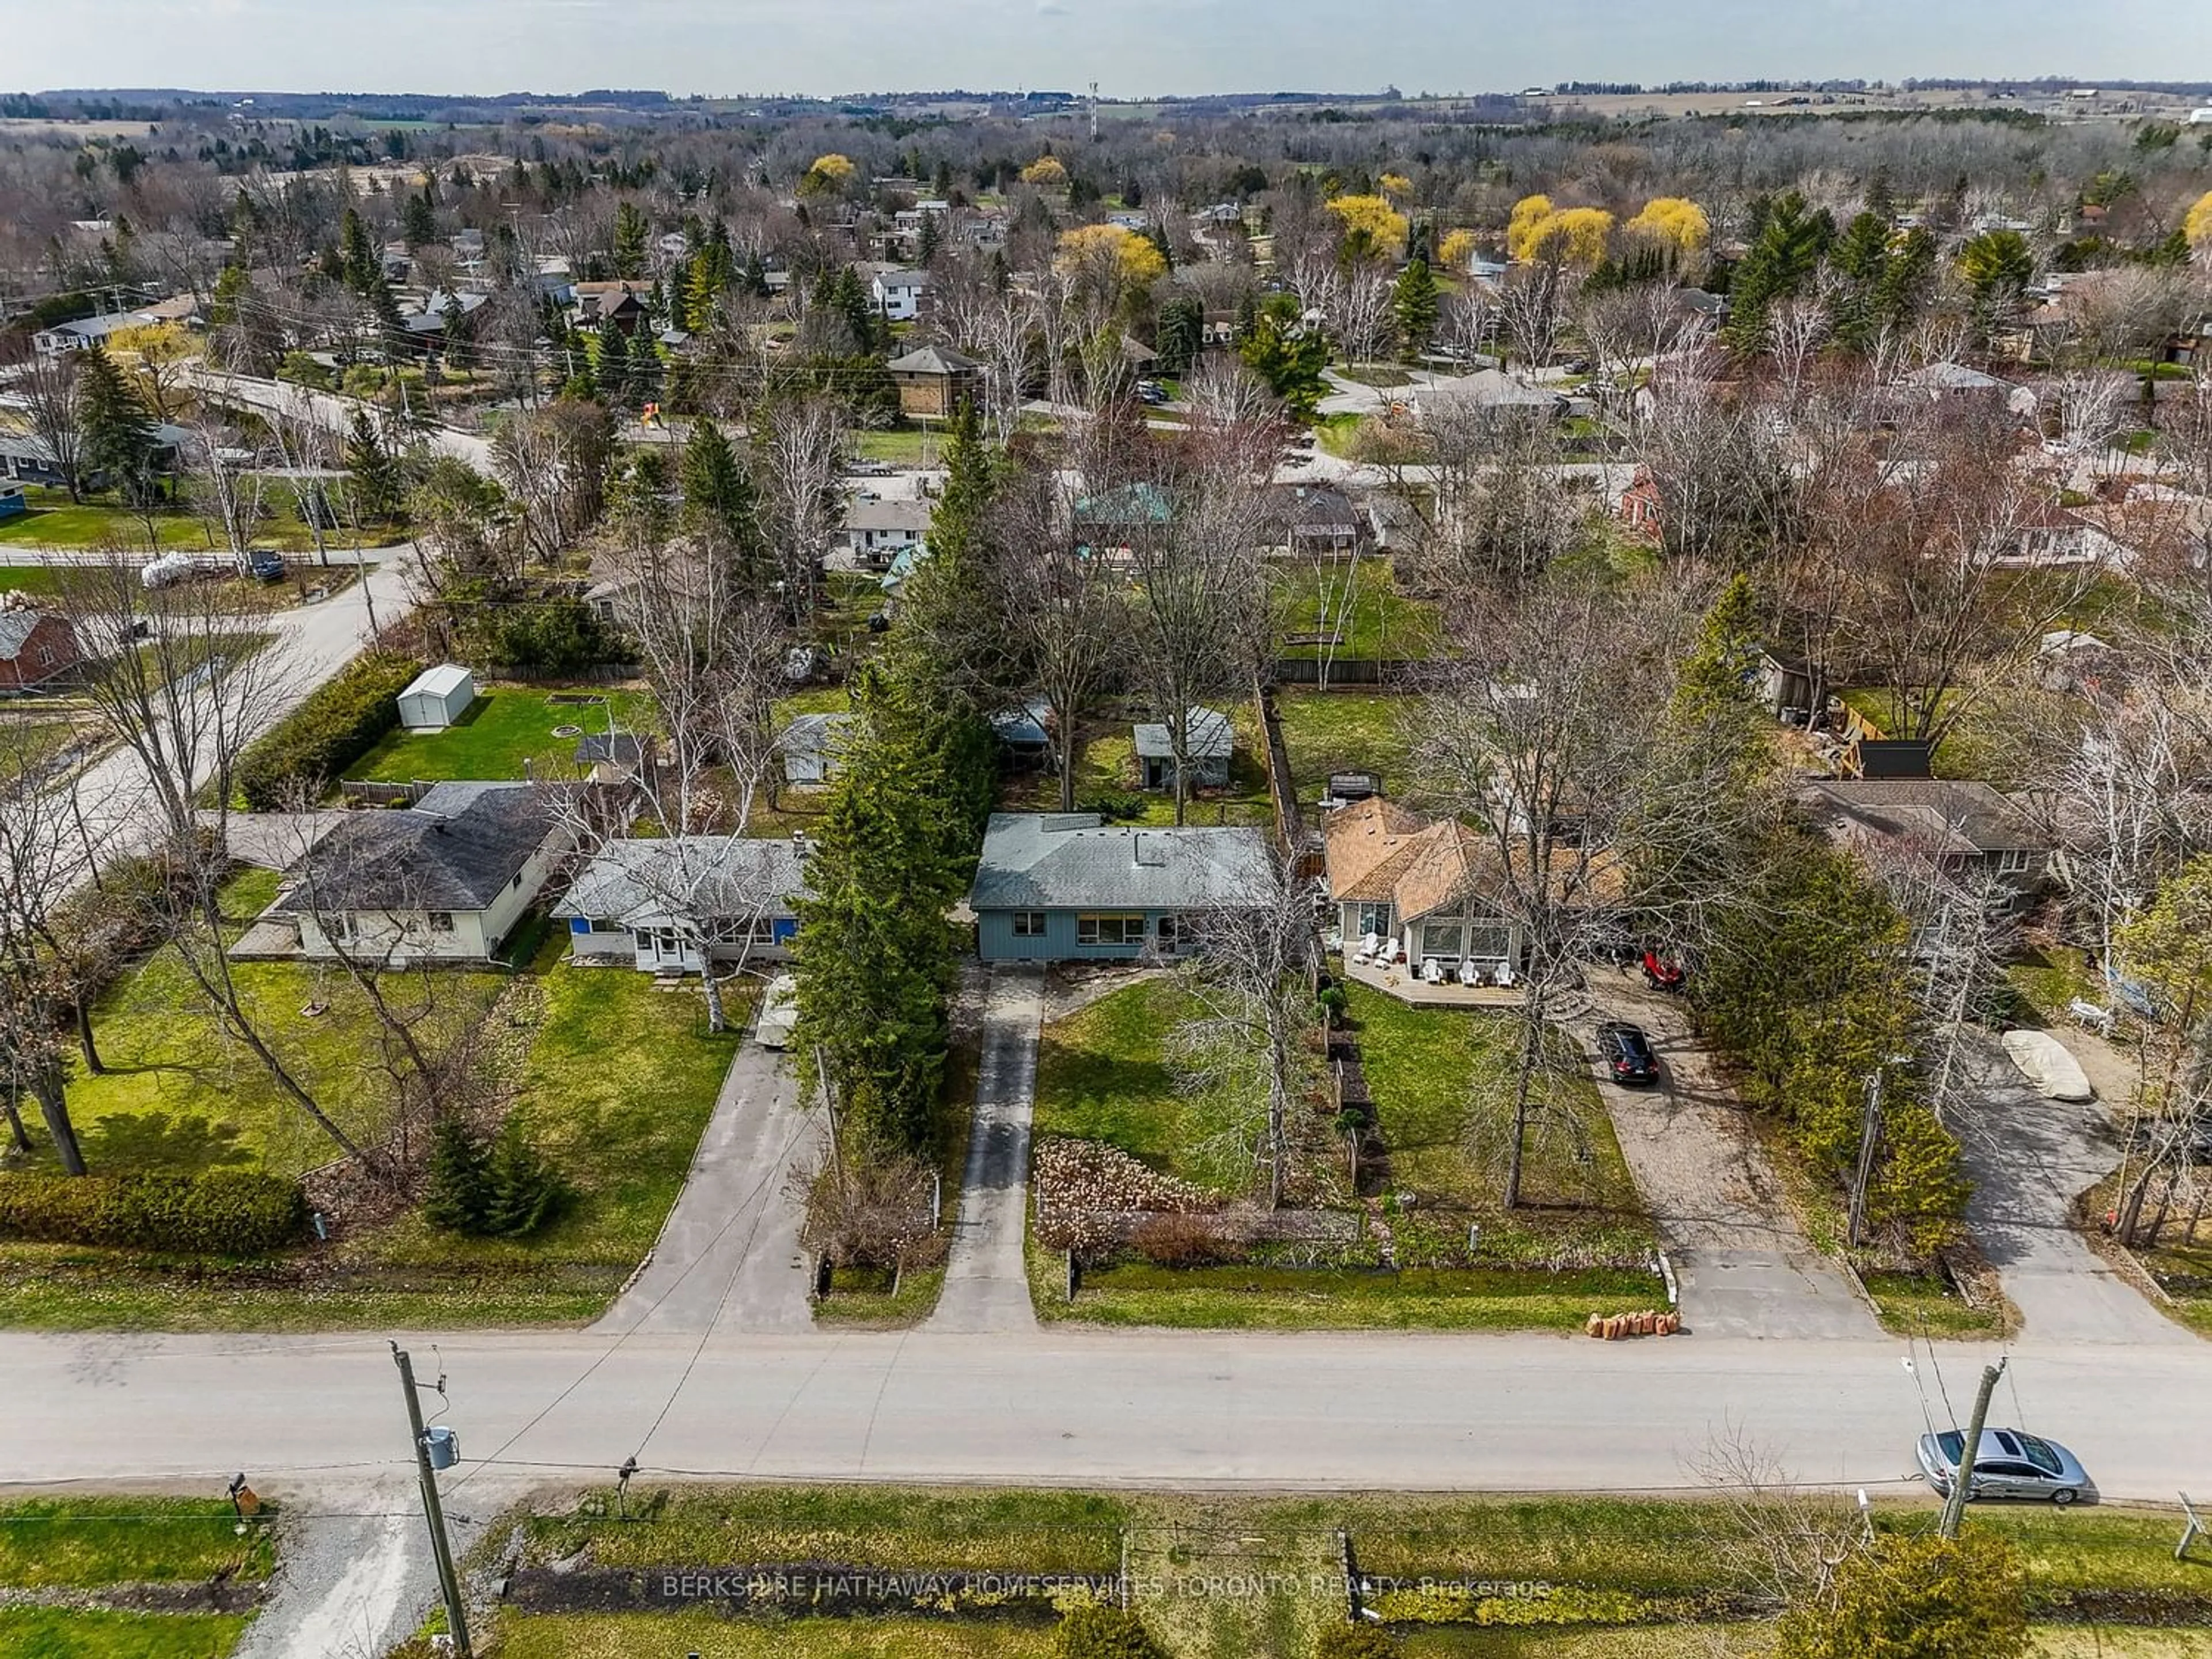 Lakeview for 62 Lakeshore Blvd, Innisfil Ontario L0L 1R0